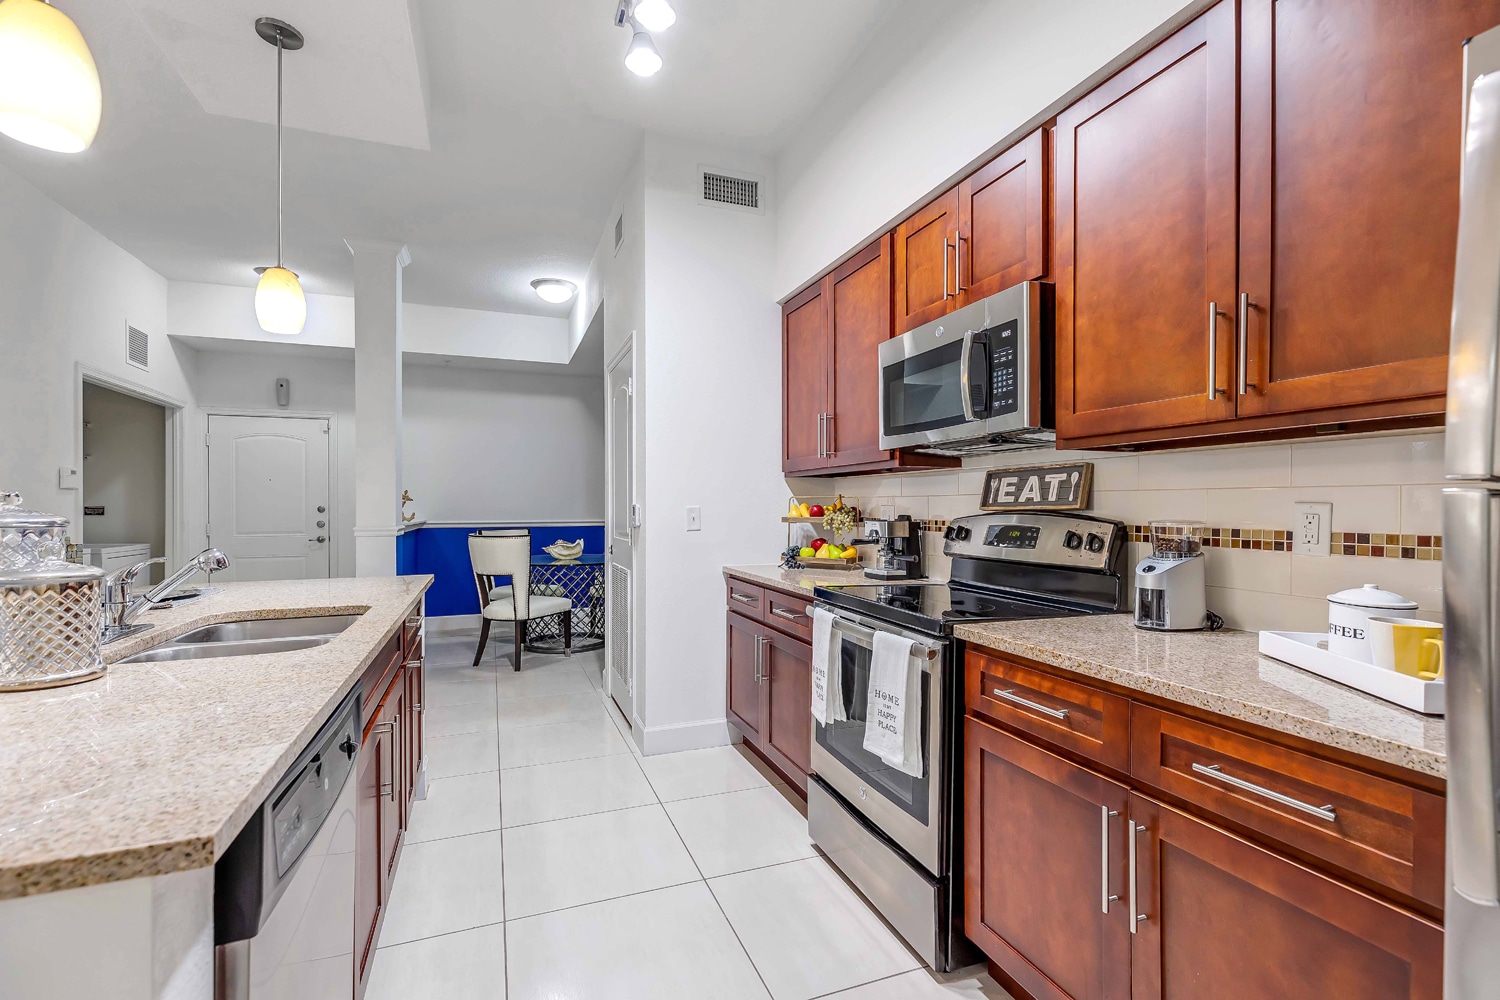 Apartments in Miramar A kitchen with stainless steel appliances and granite counter tops. Miramar Park Apartments